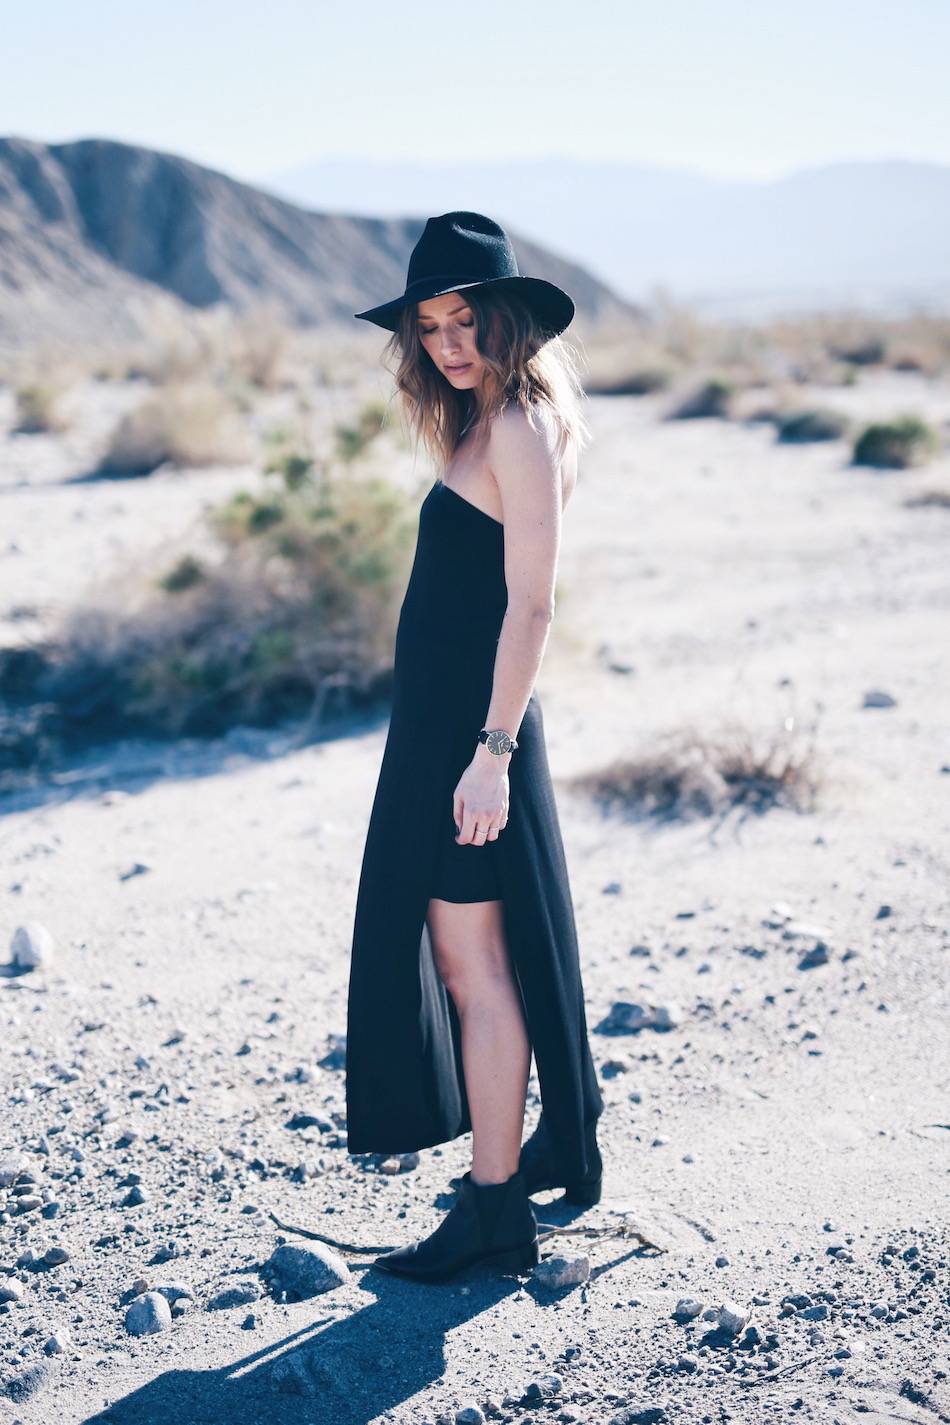 black strapless dress hat and boots in desert